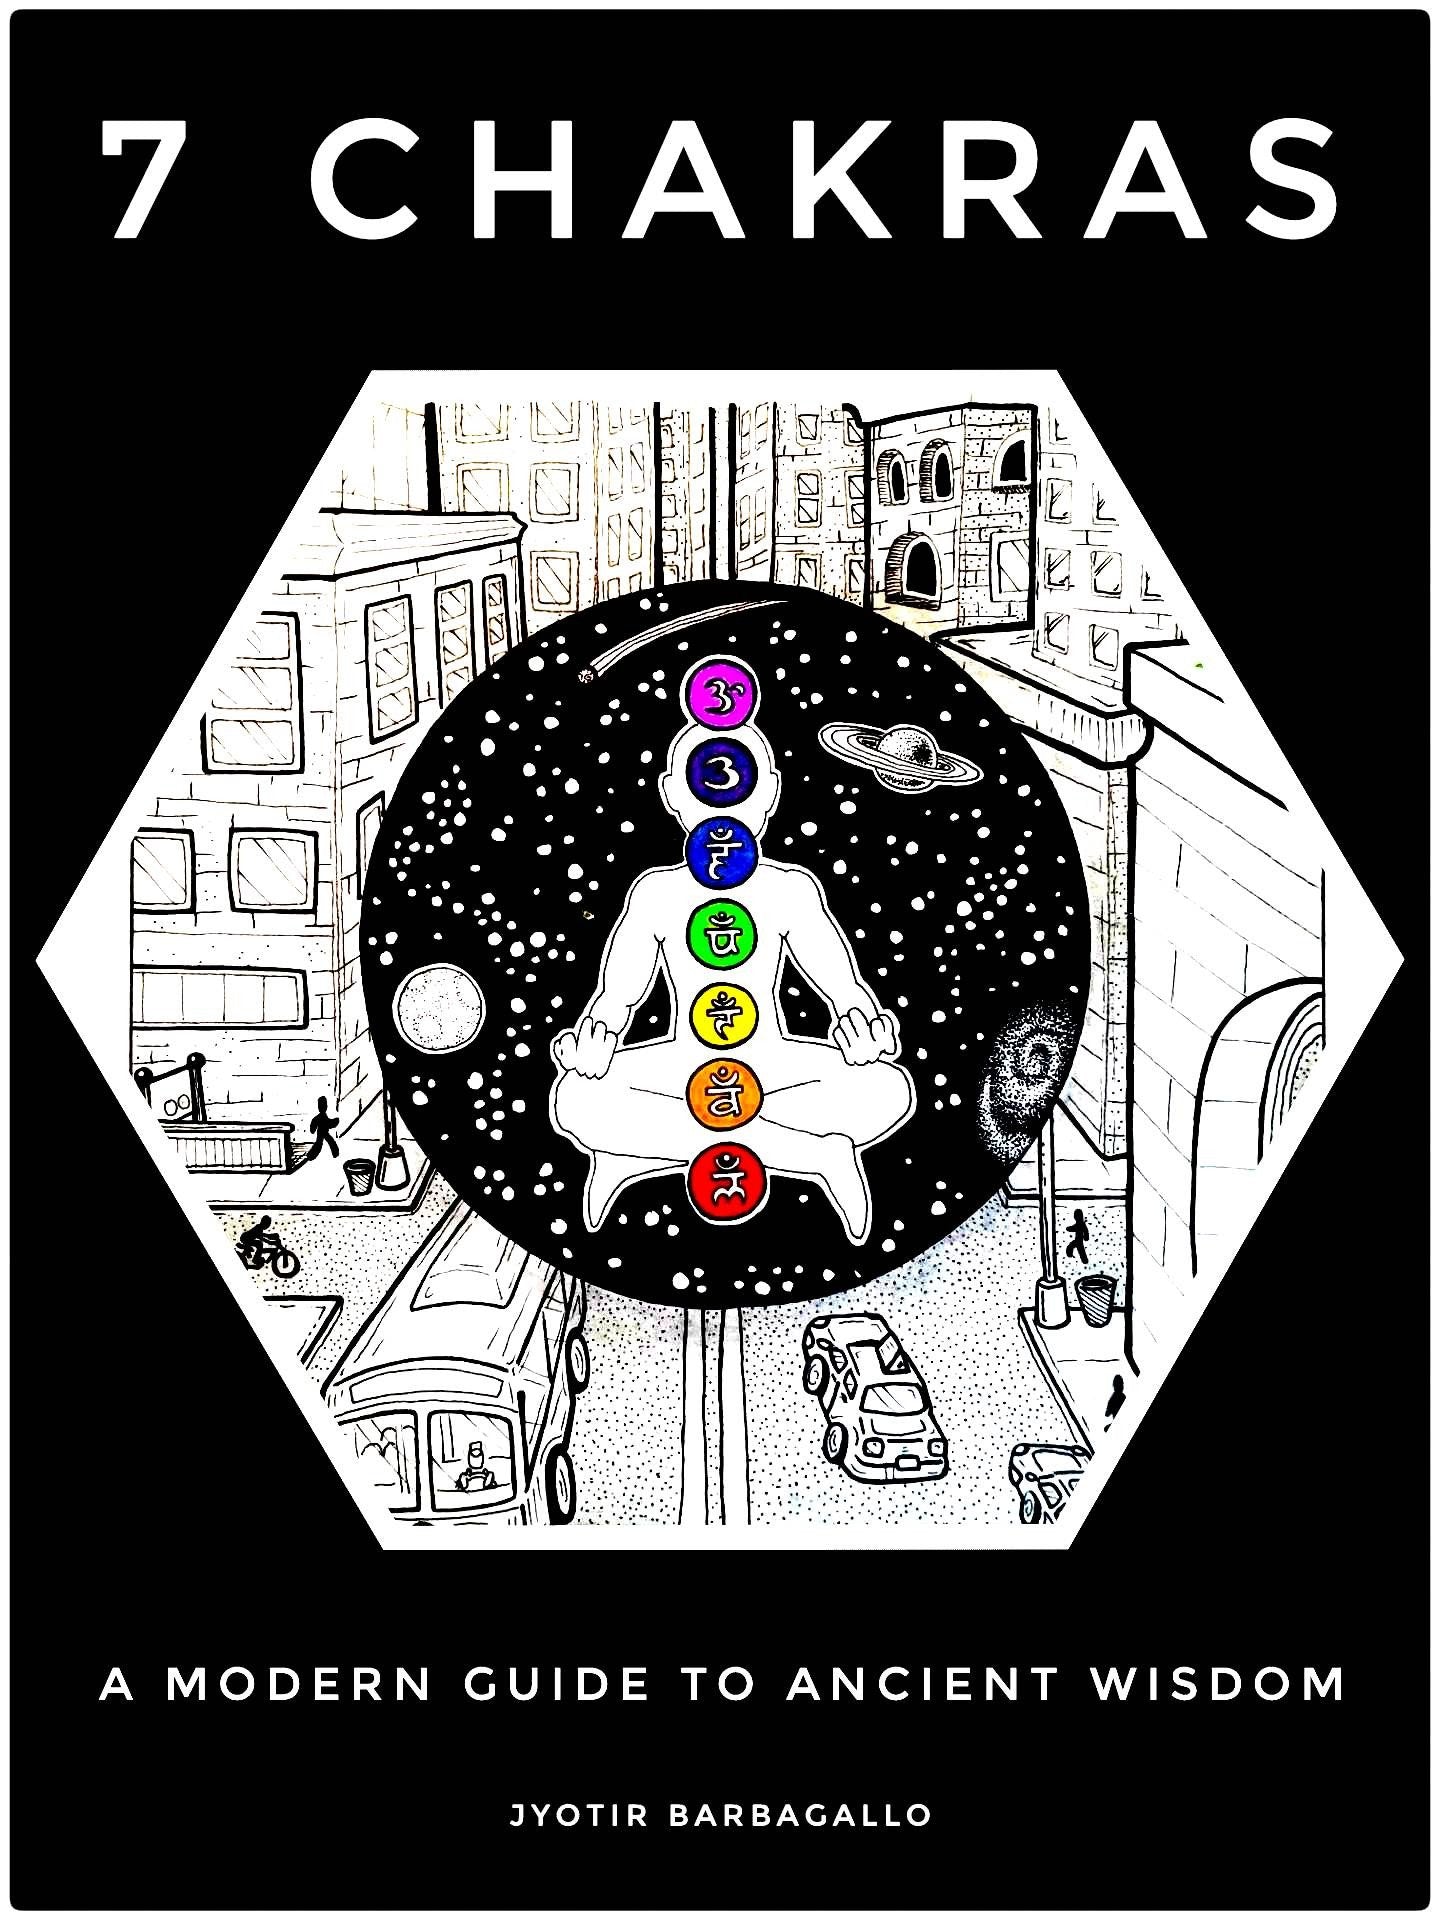 7 Chakras: A Modern Guide To Ancient Wisdom